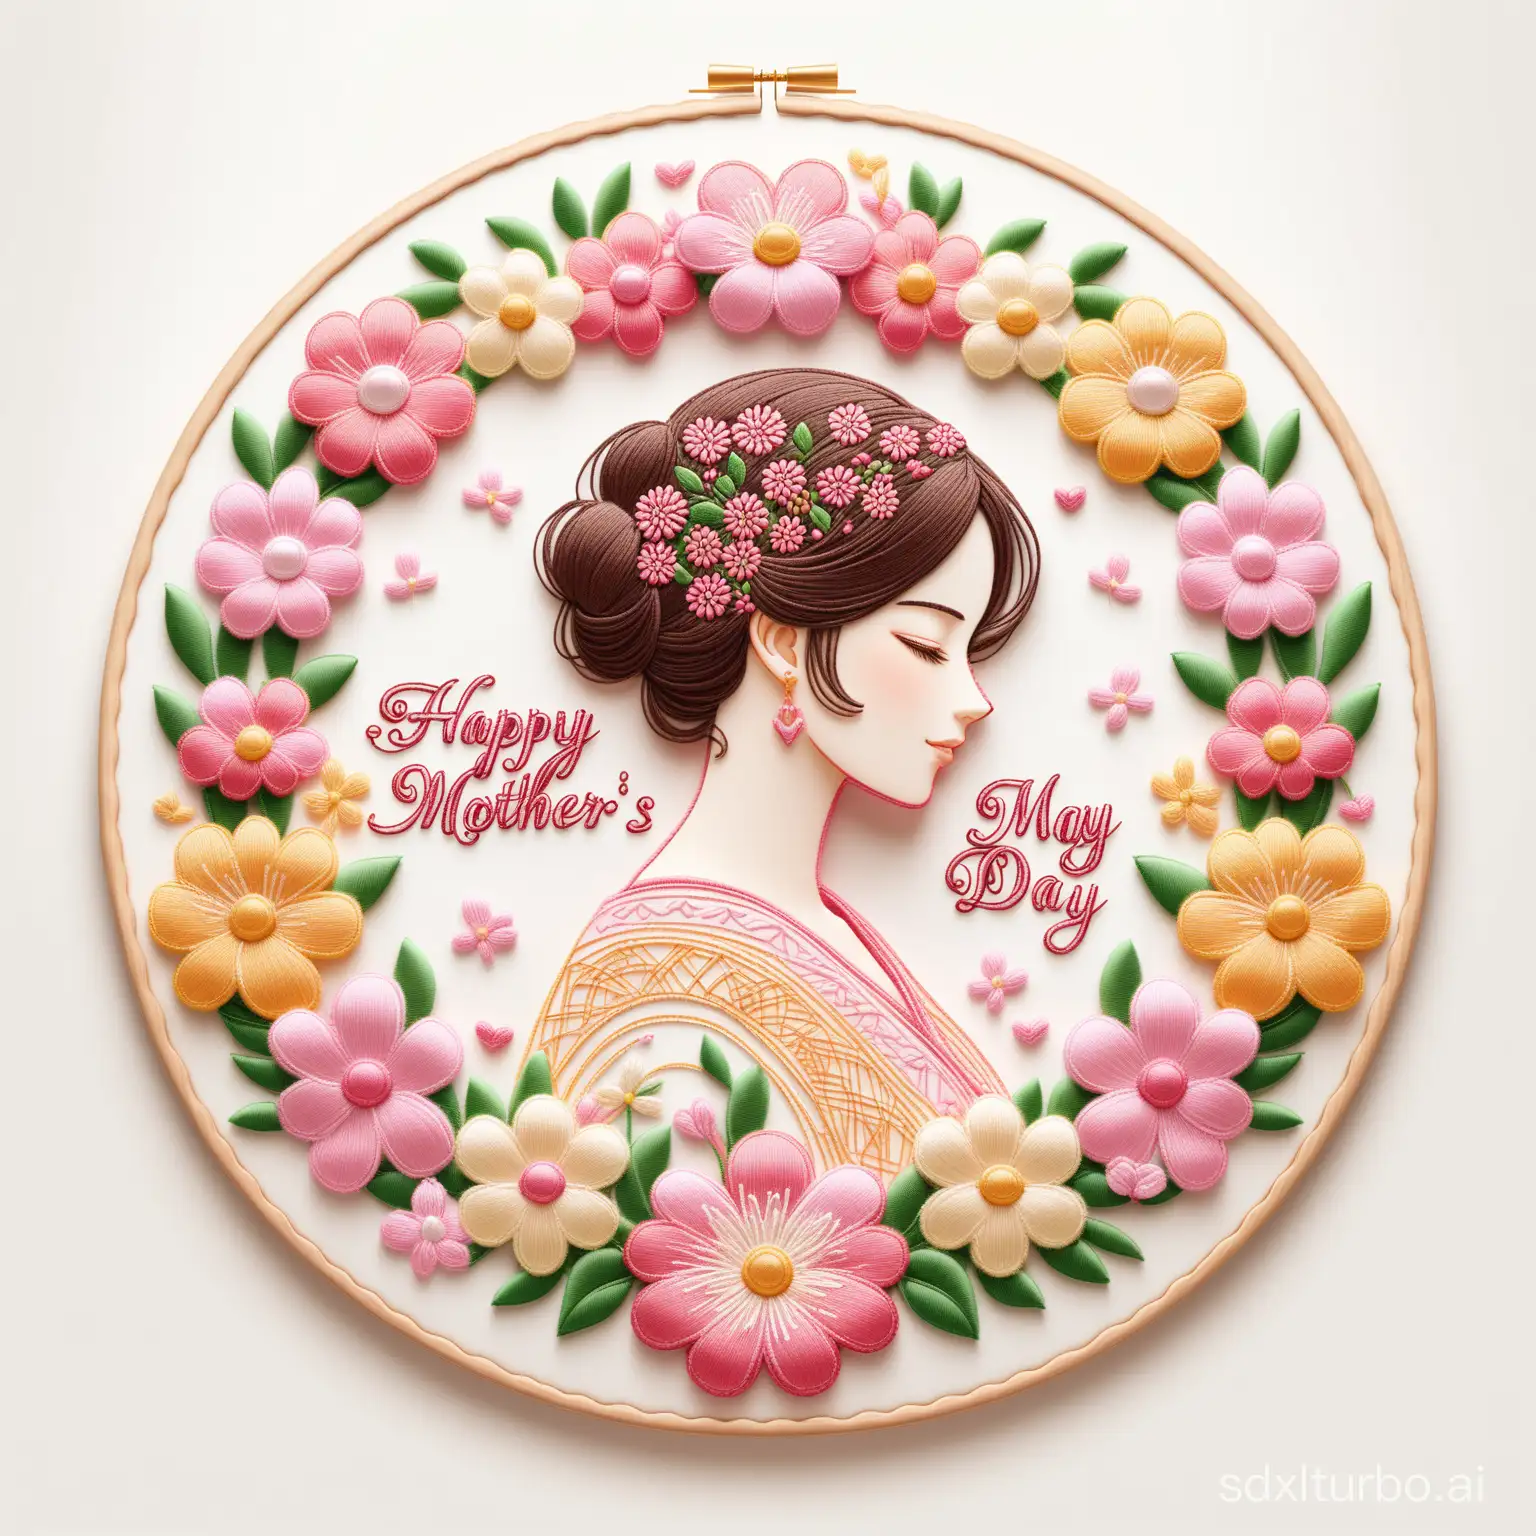 Heartwarming-Mothers-Day-Circular-Embroidery-with-Delicate-Floral-Surroundings